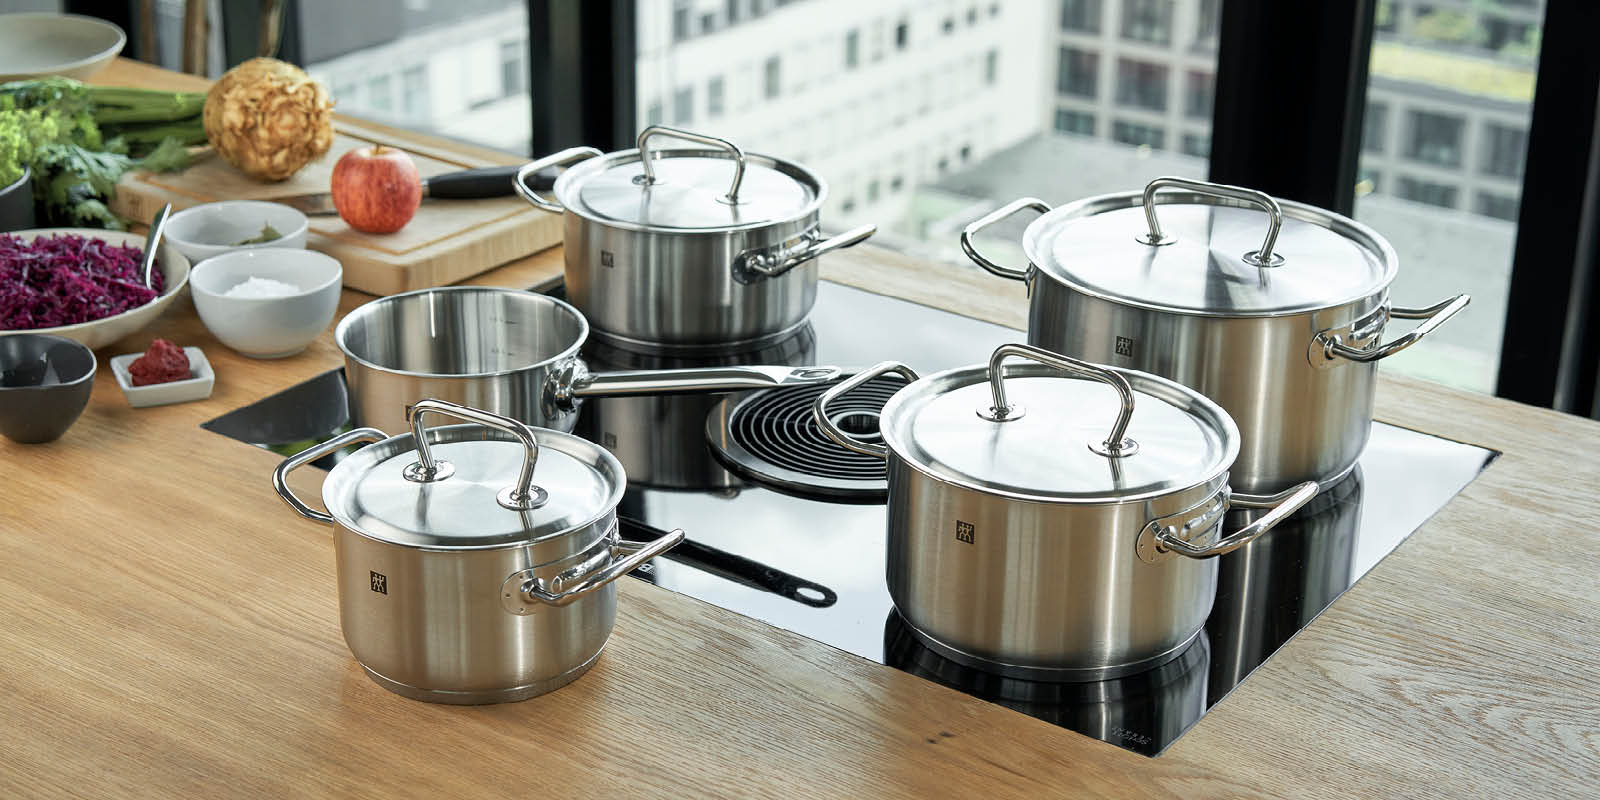 https://www.zwilling.com/on/demandware.static/-/Sites-zwilling-uk-Library/default/dwcfc1c84b/images/product-content/masonry-content/zwilling/cookware/twin-classic/40901-001-0_Lifestyle_Image_Series_OS_1200x600.jpg